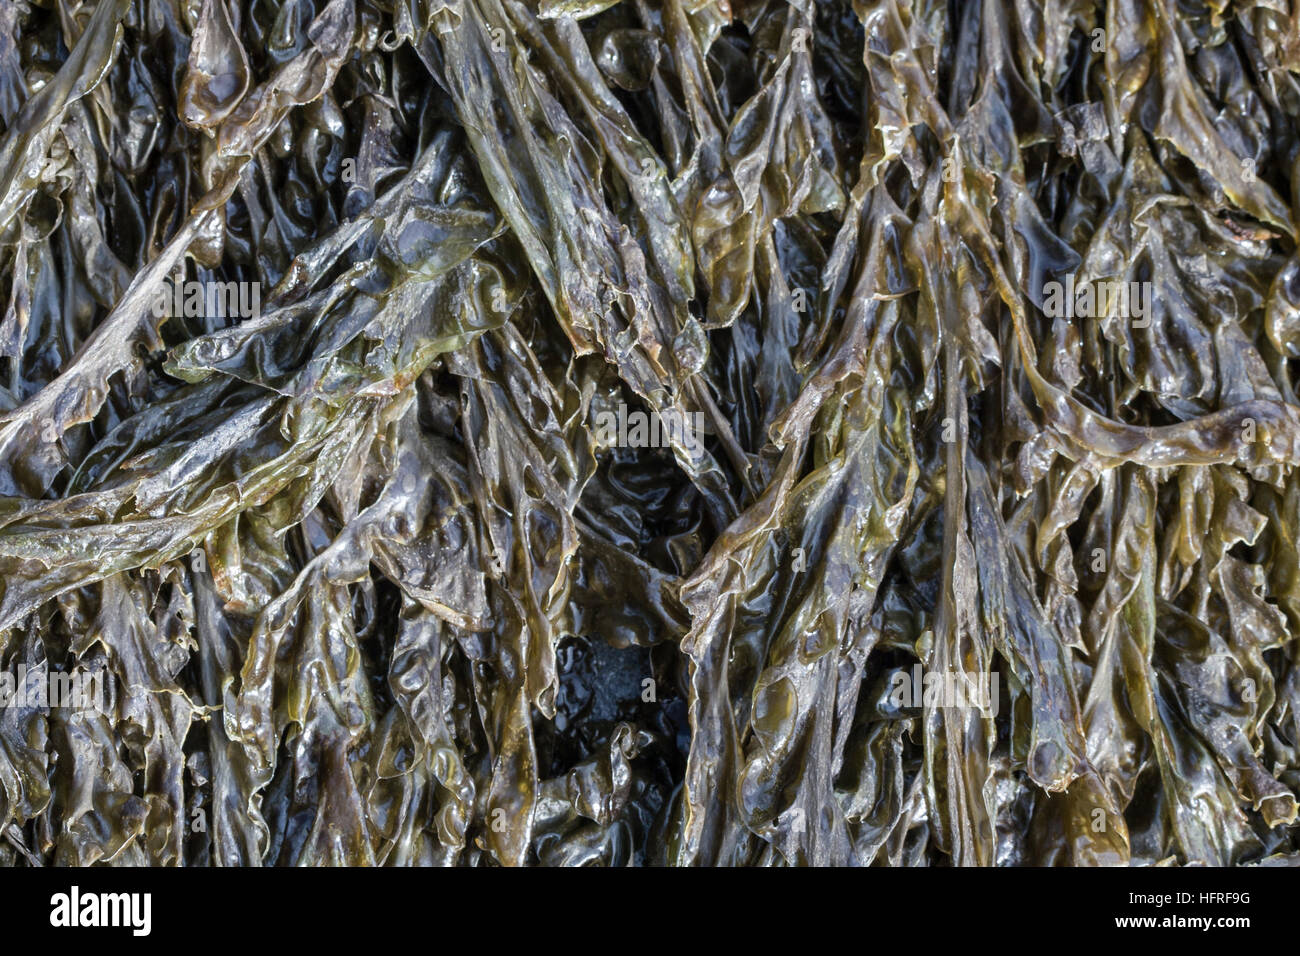 Porphyra sp. seaweed, adhering to rocks.  This is what the food 'nori' comes from. Stock Photo